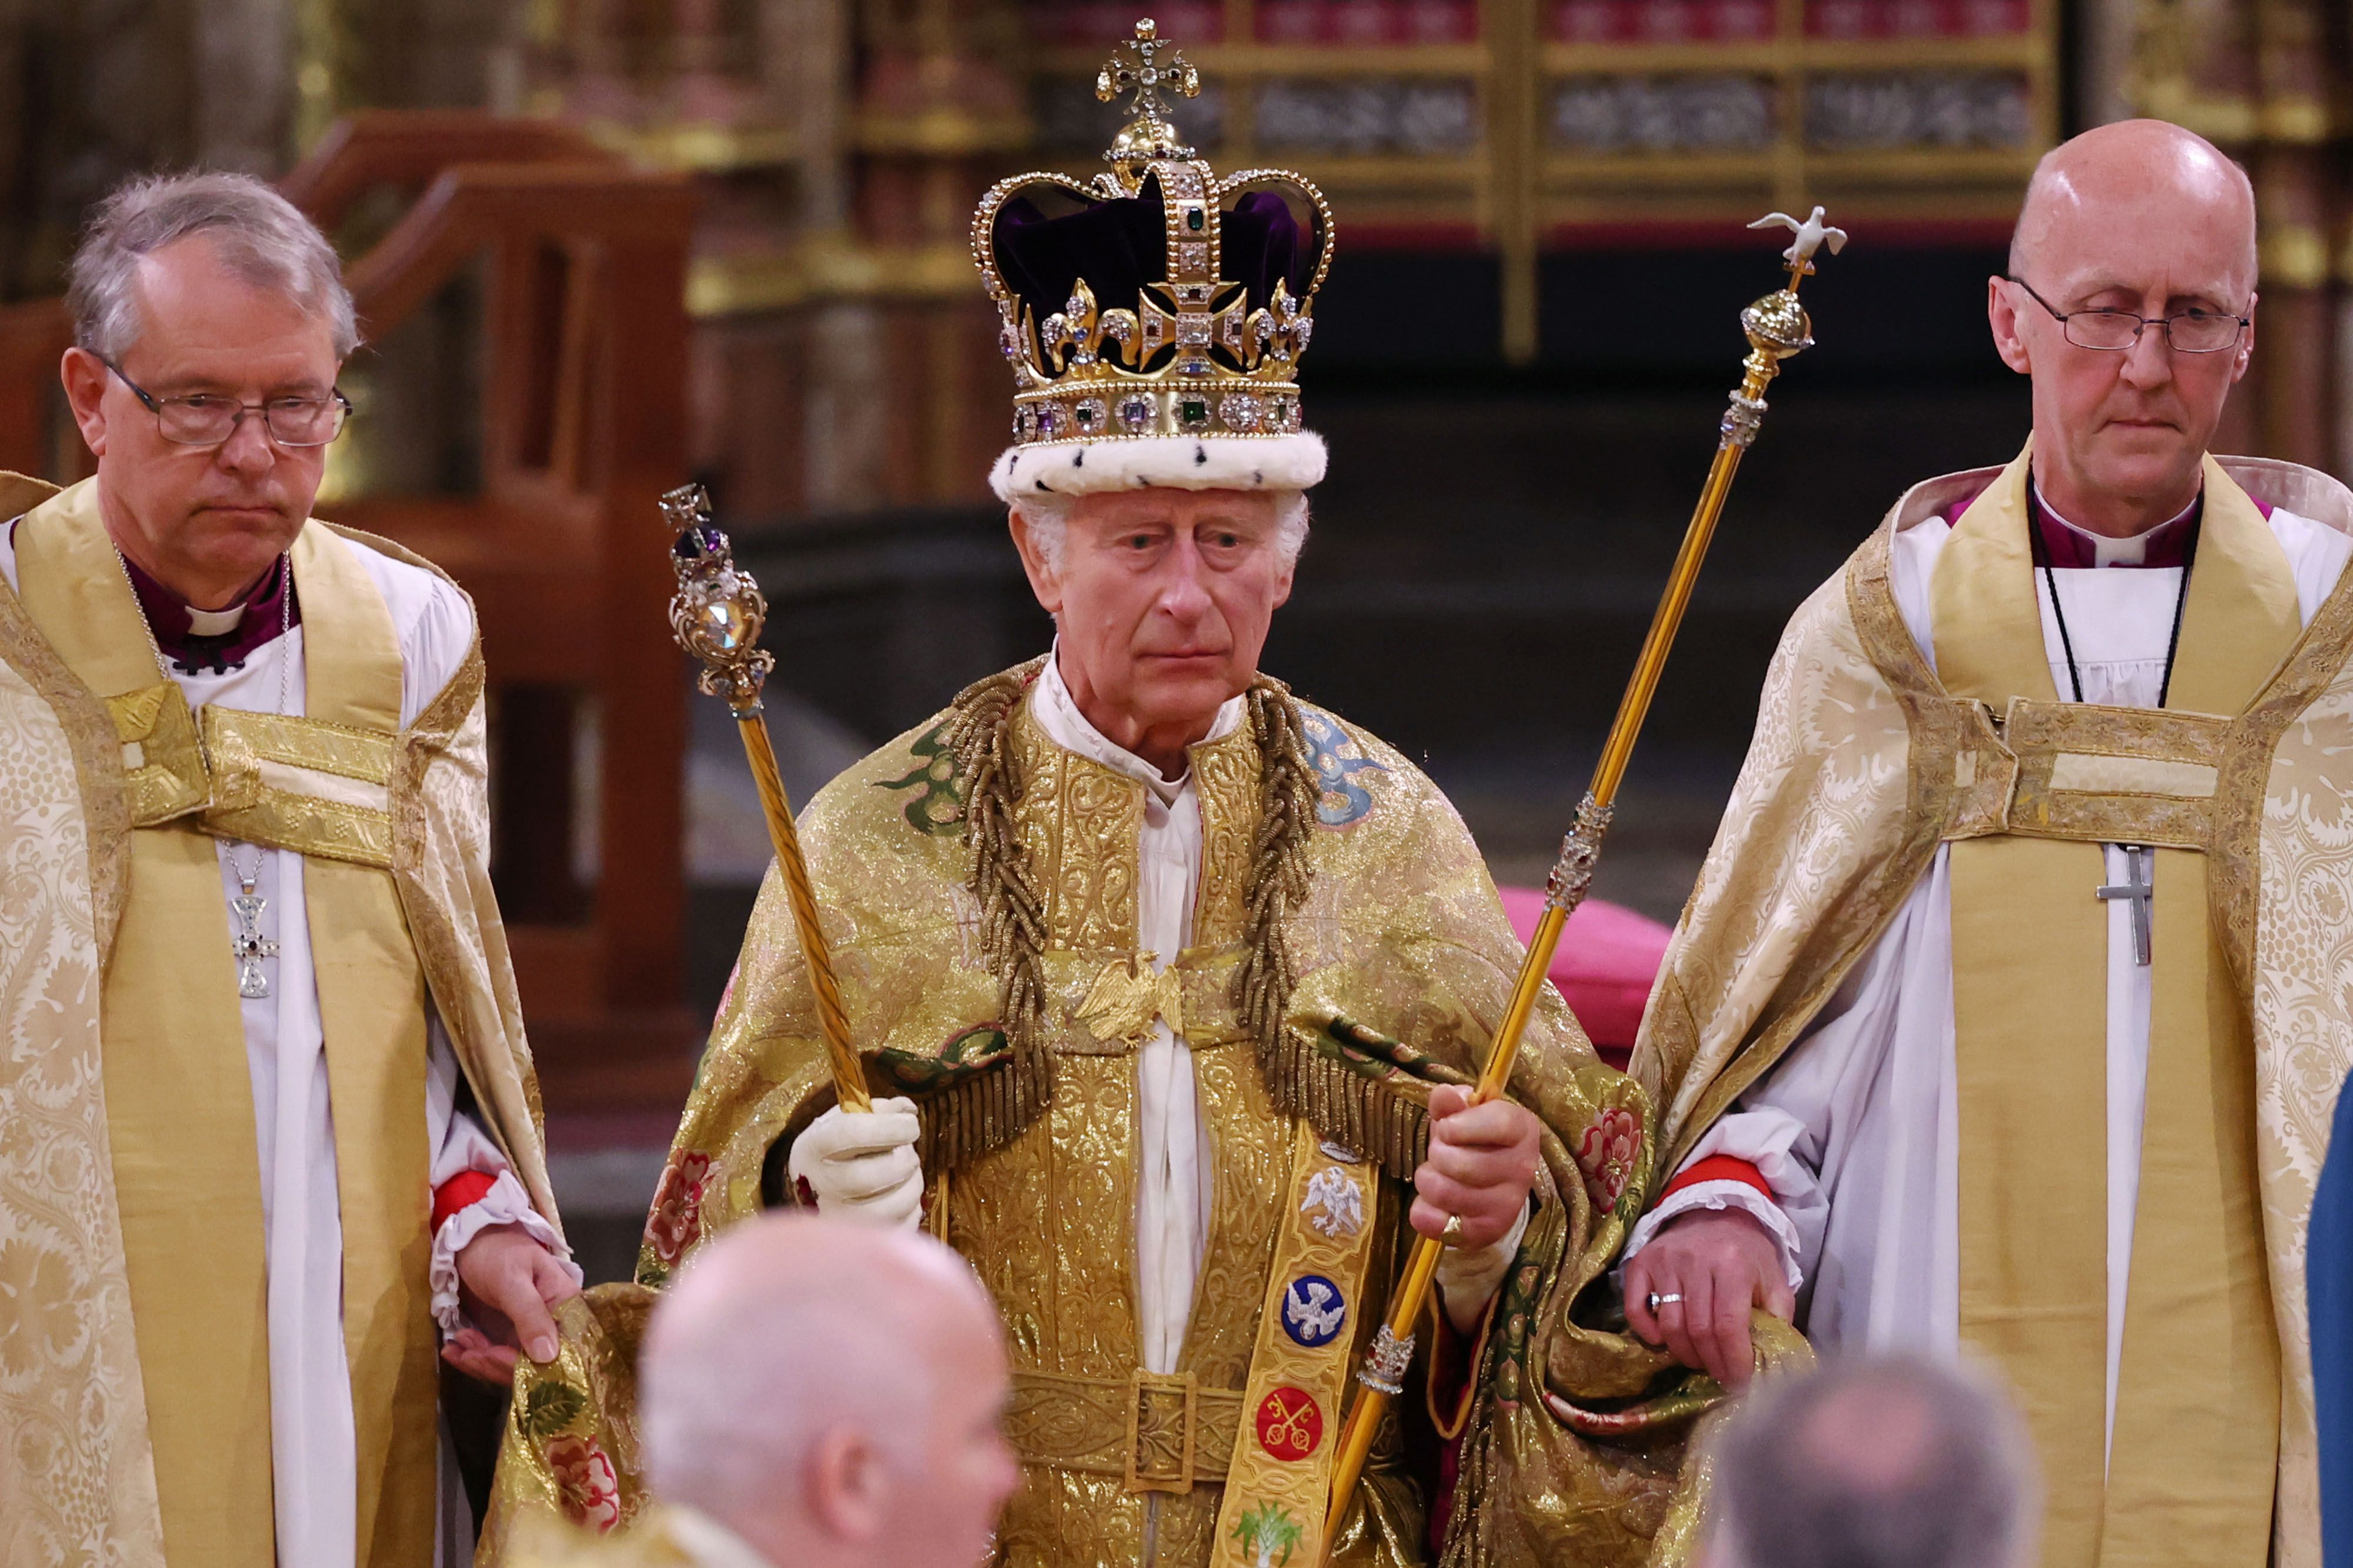 As it happened: UK crowns King Charles at coronation as world watches